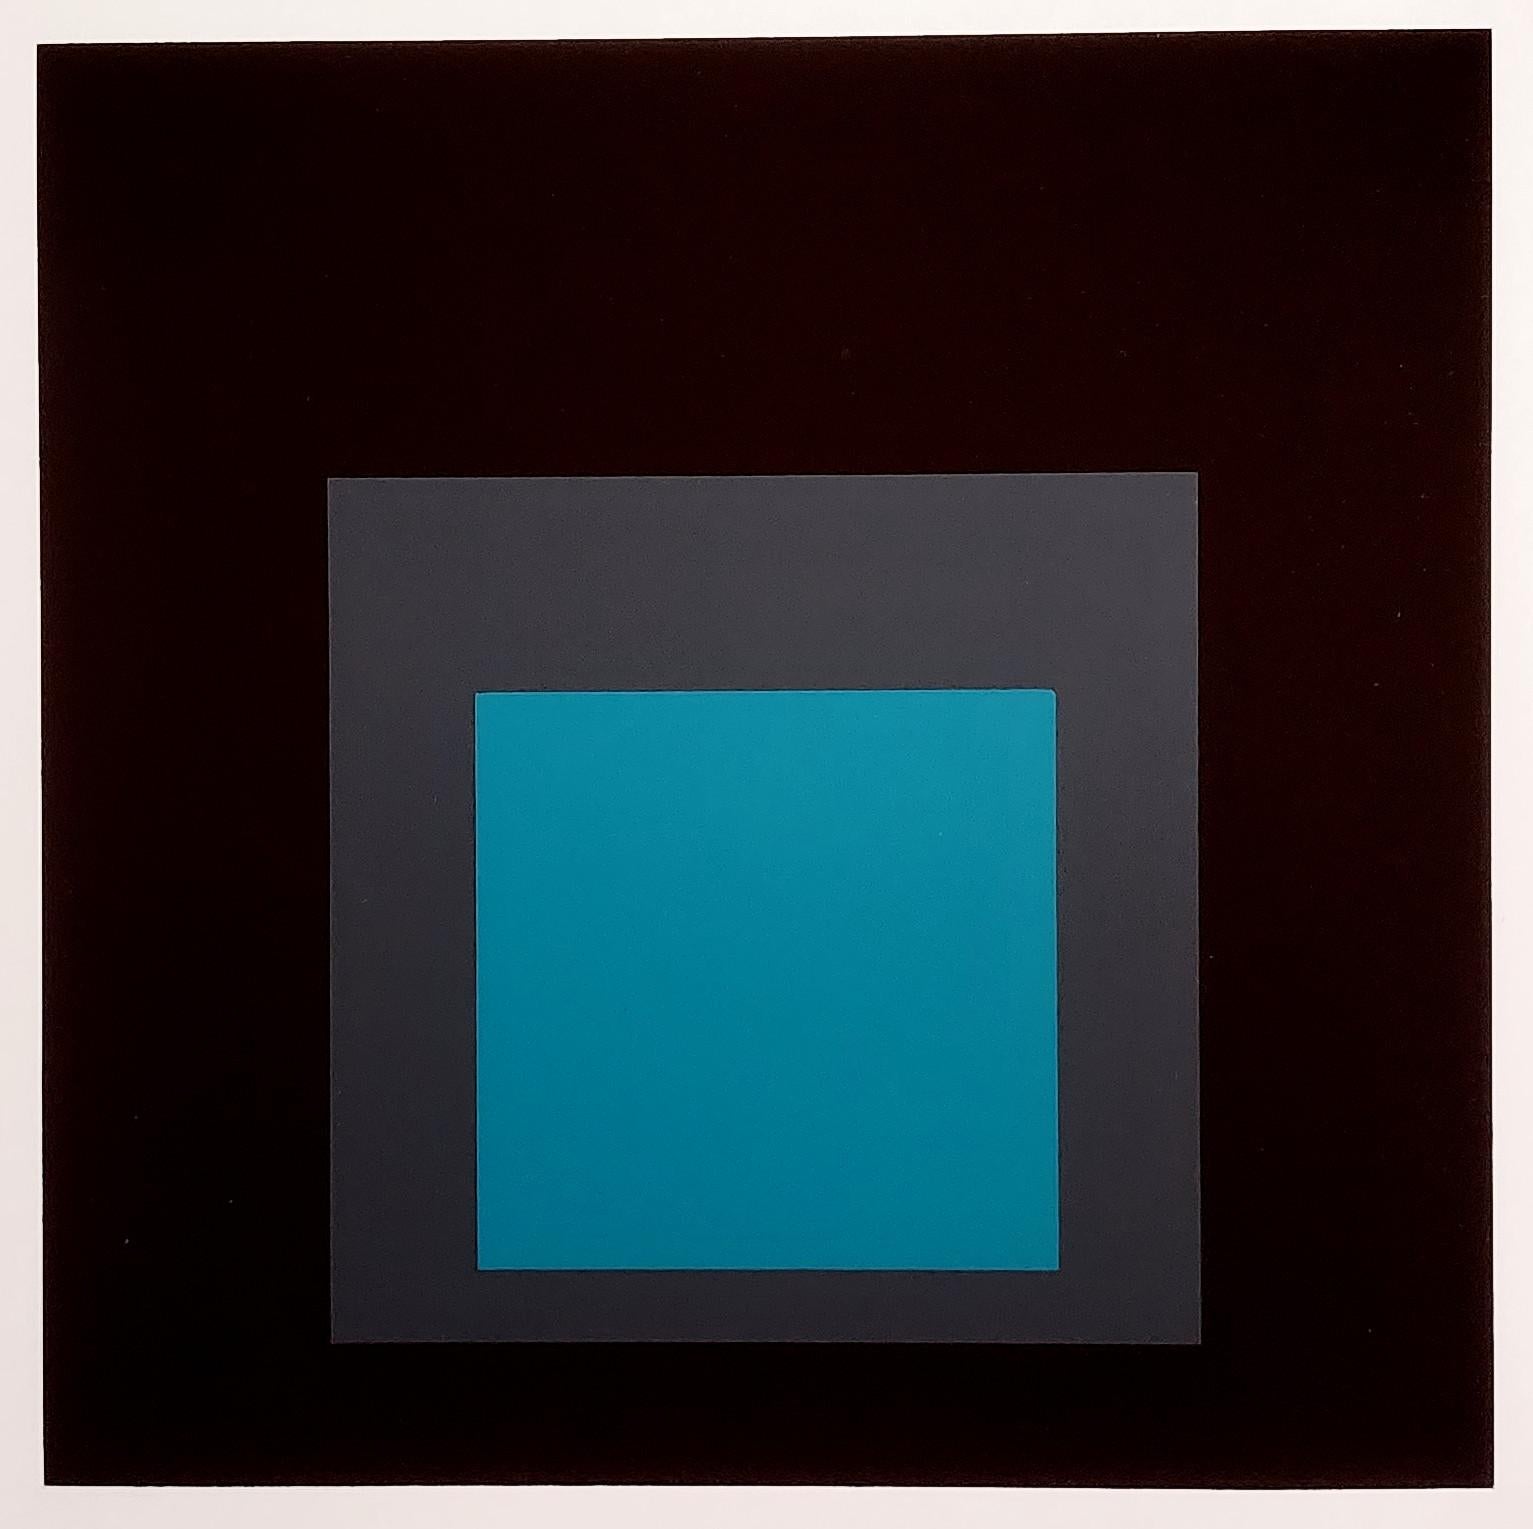 Homage to the Square: Six Silkscreen Prints (~56% OFF LIST PRICE - LIMITED TIME) 3